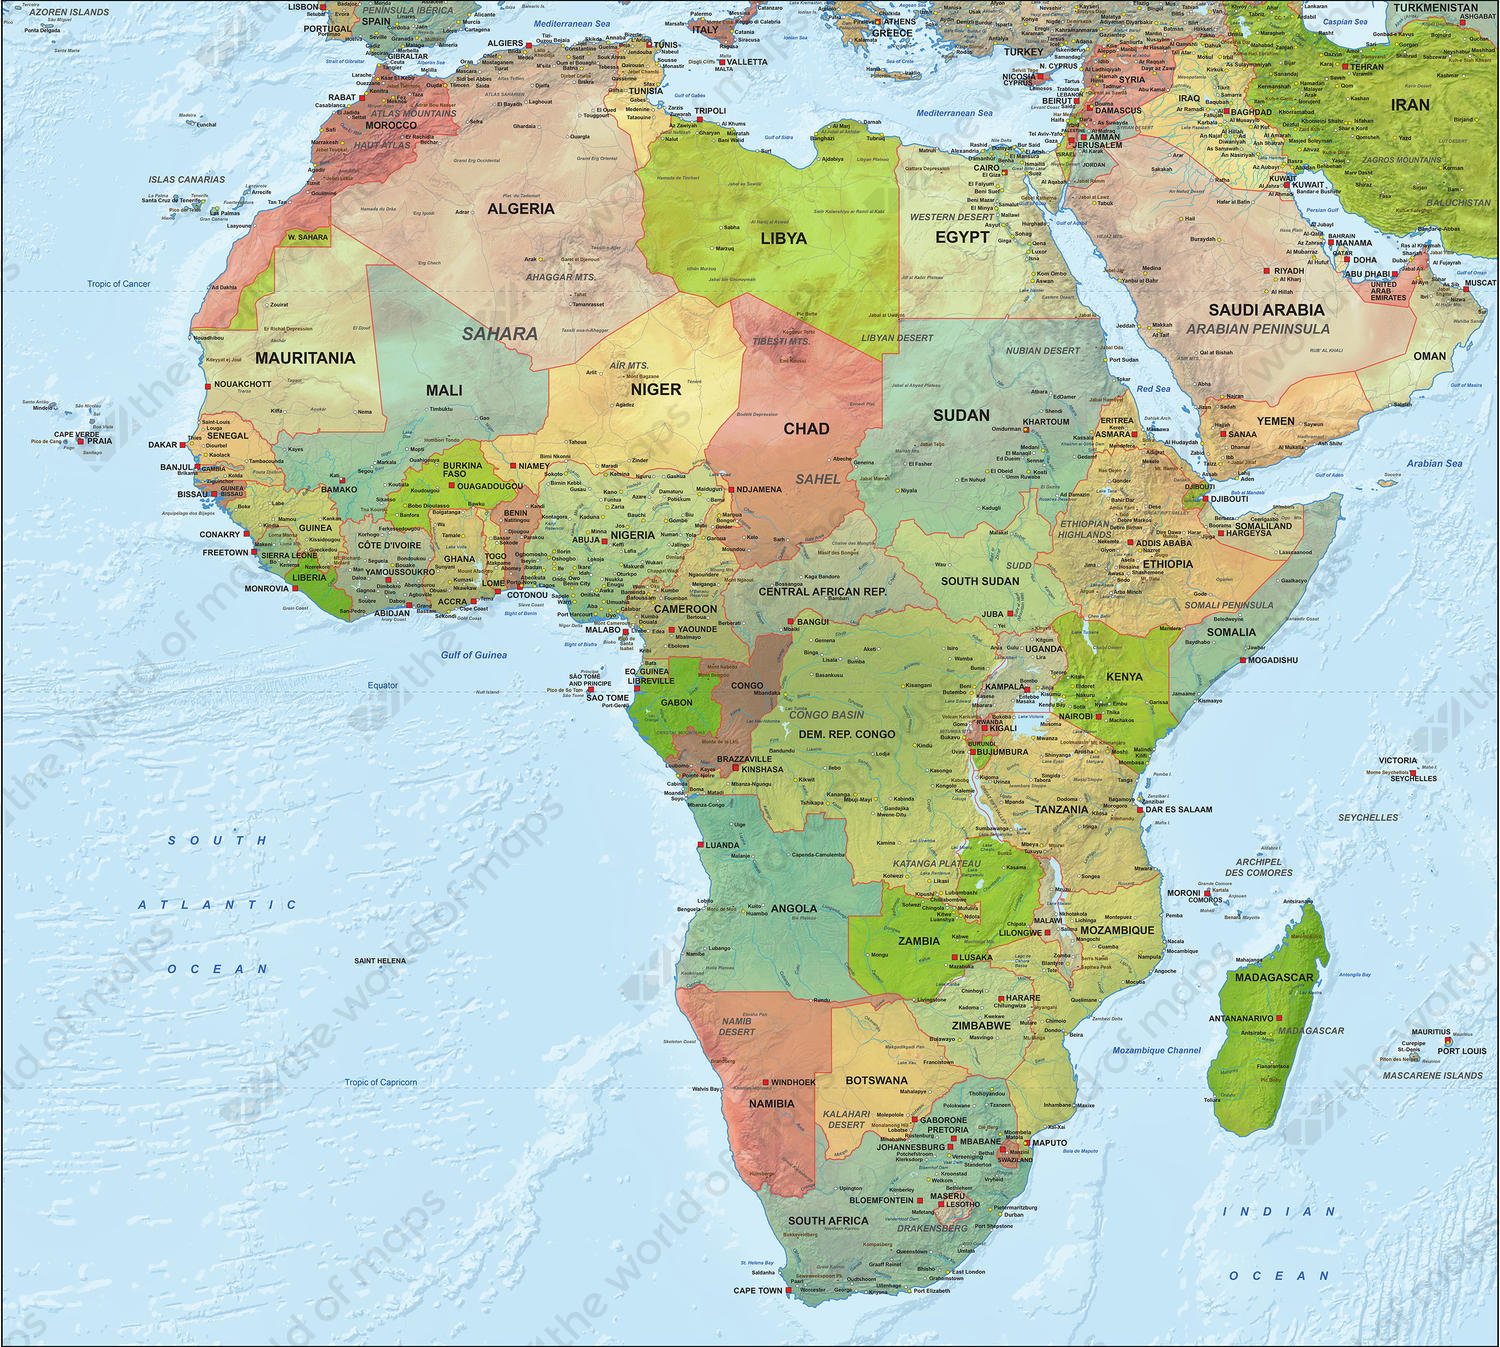 africa-political-map-political-map-of-africa-maps-of-images-and